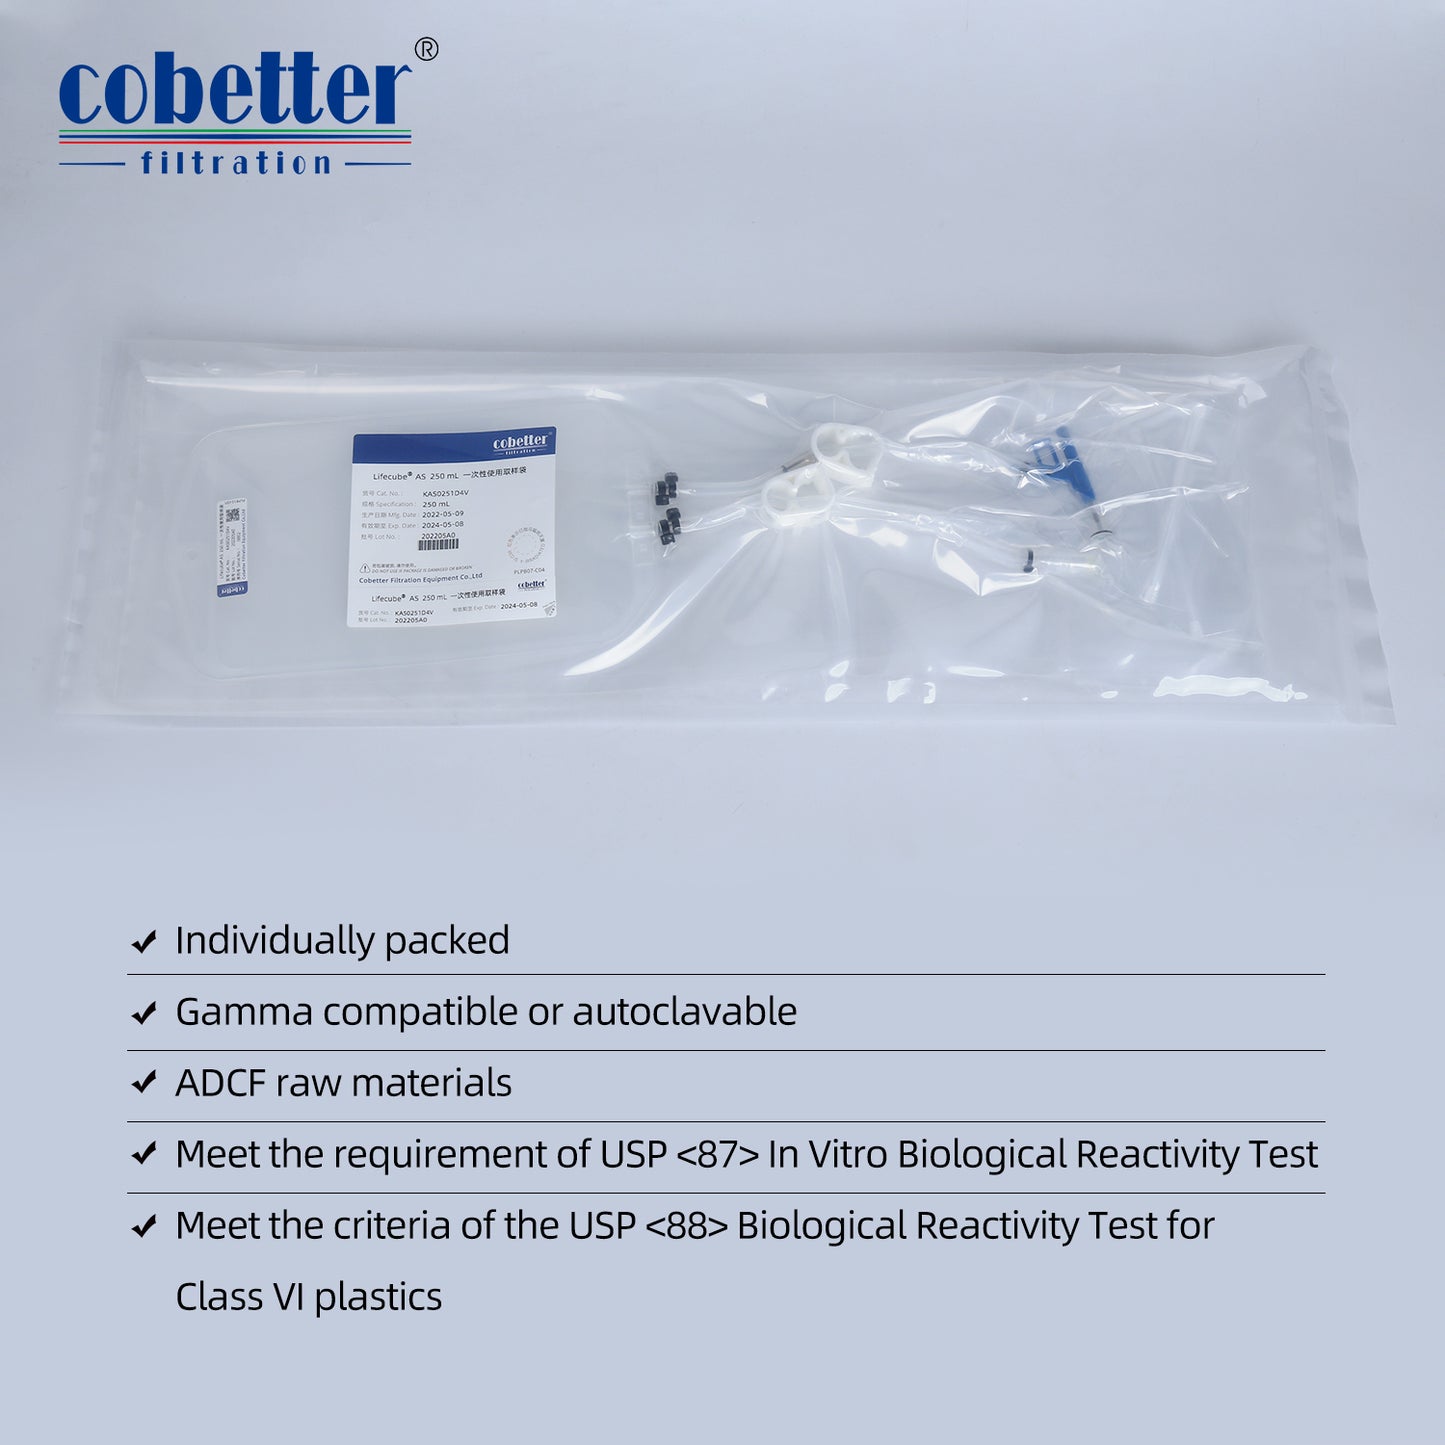 COBETTER 50mL Sampling Bag with 1/8"ID x 1/4"OD Tubing Sterile by Gamma Irradiation